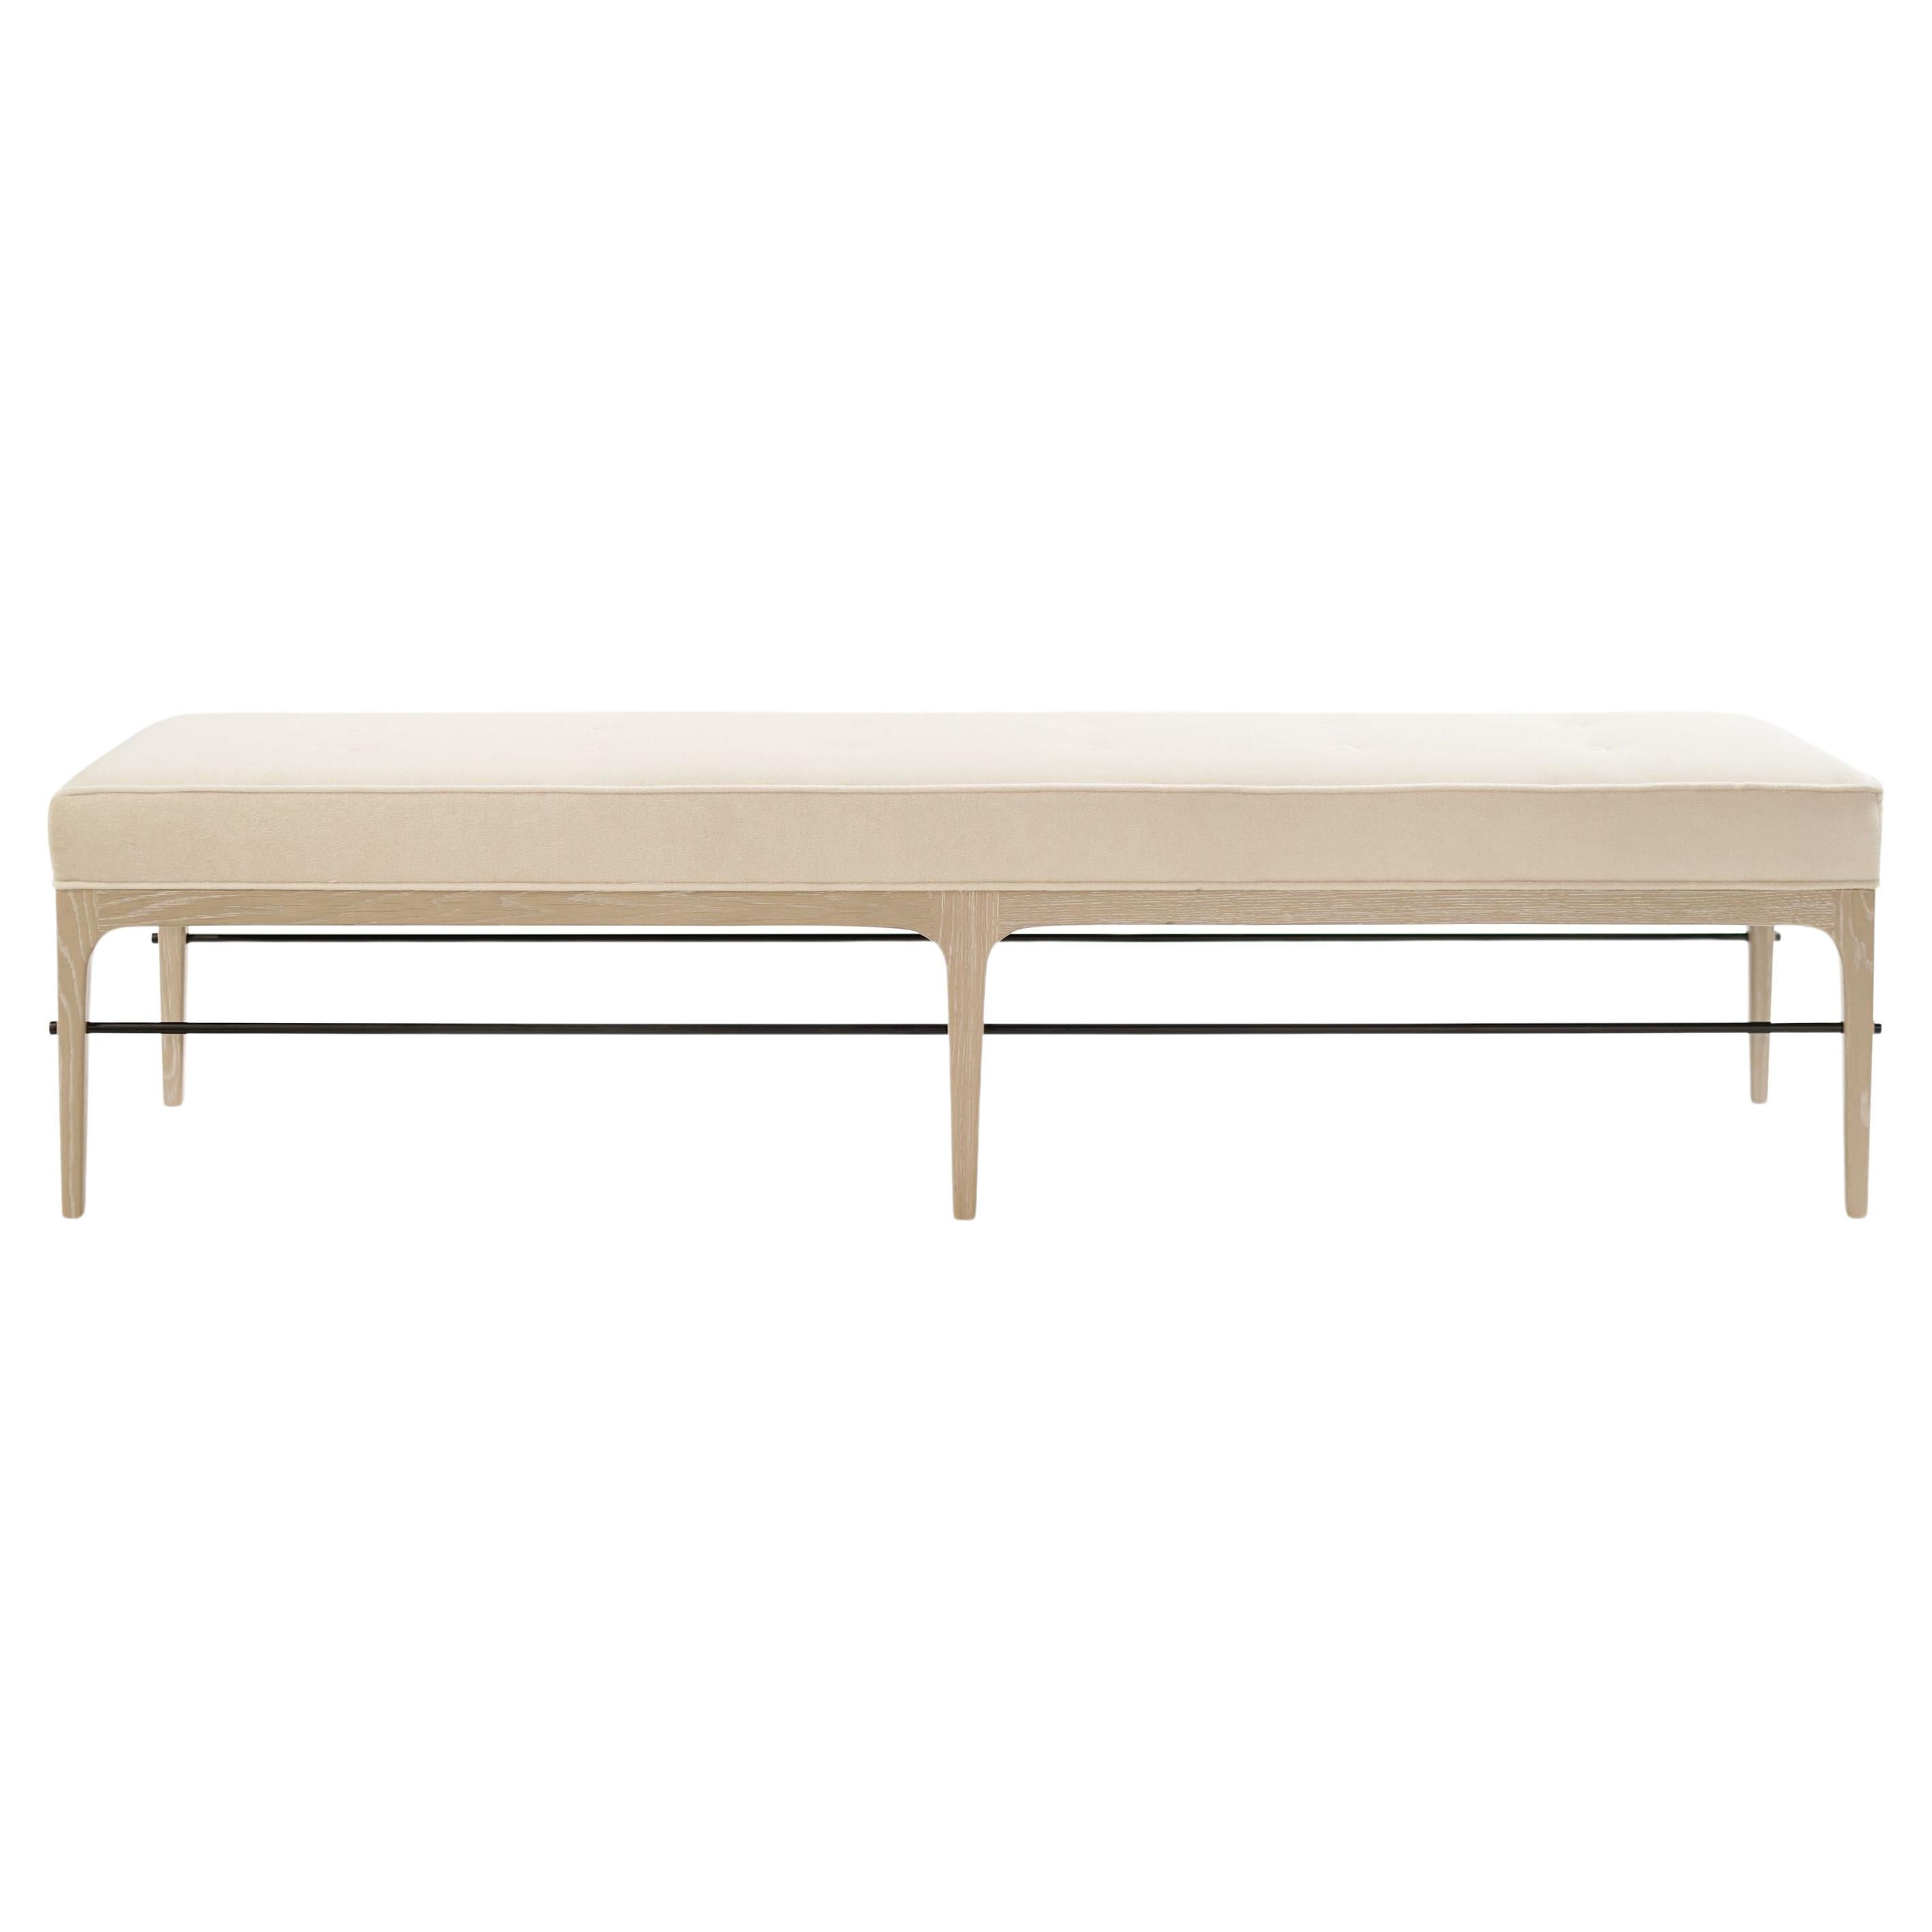 Linear Bench in White Oak Series 72 by Stamford Modern